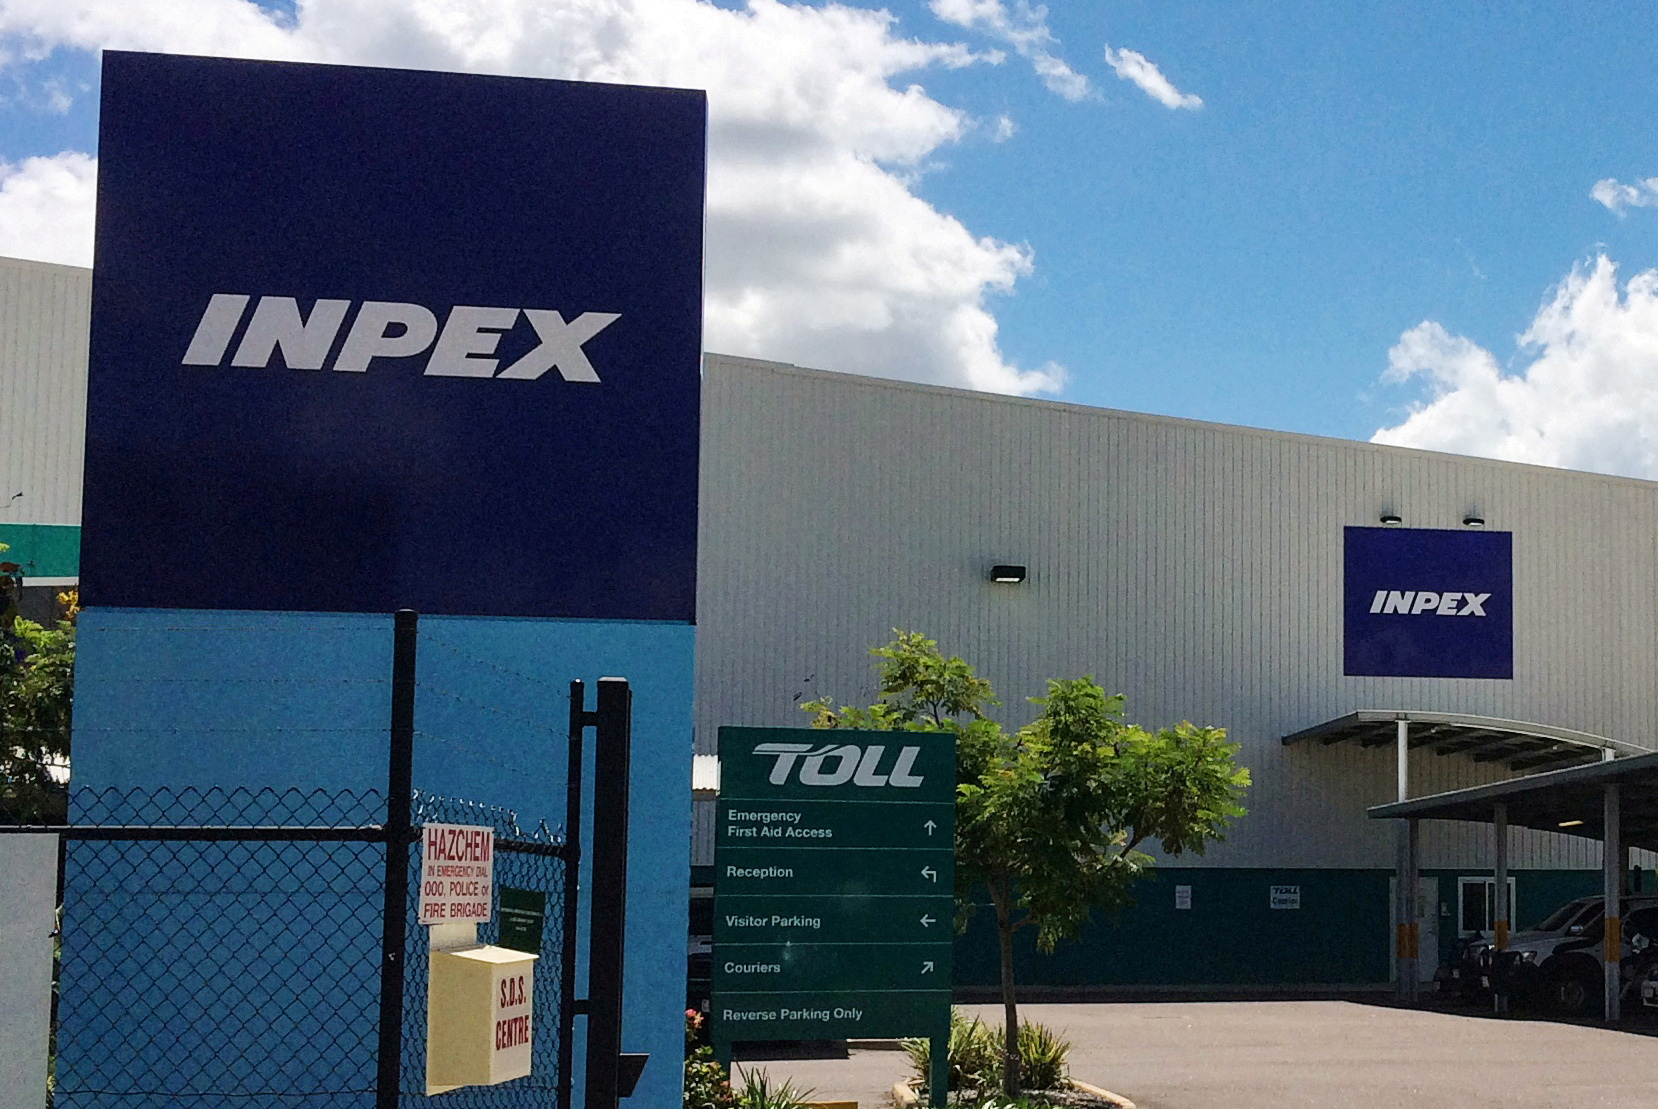 A view of a storage facility for Inpex's offshore Ichthys project in an industrial park in Darwin